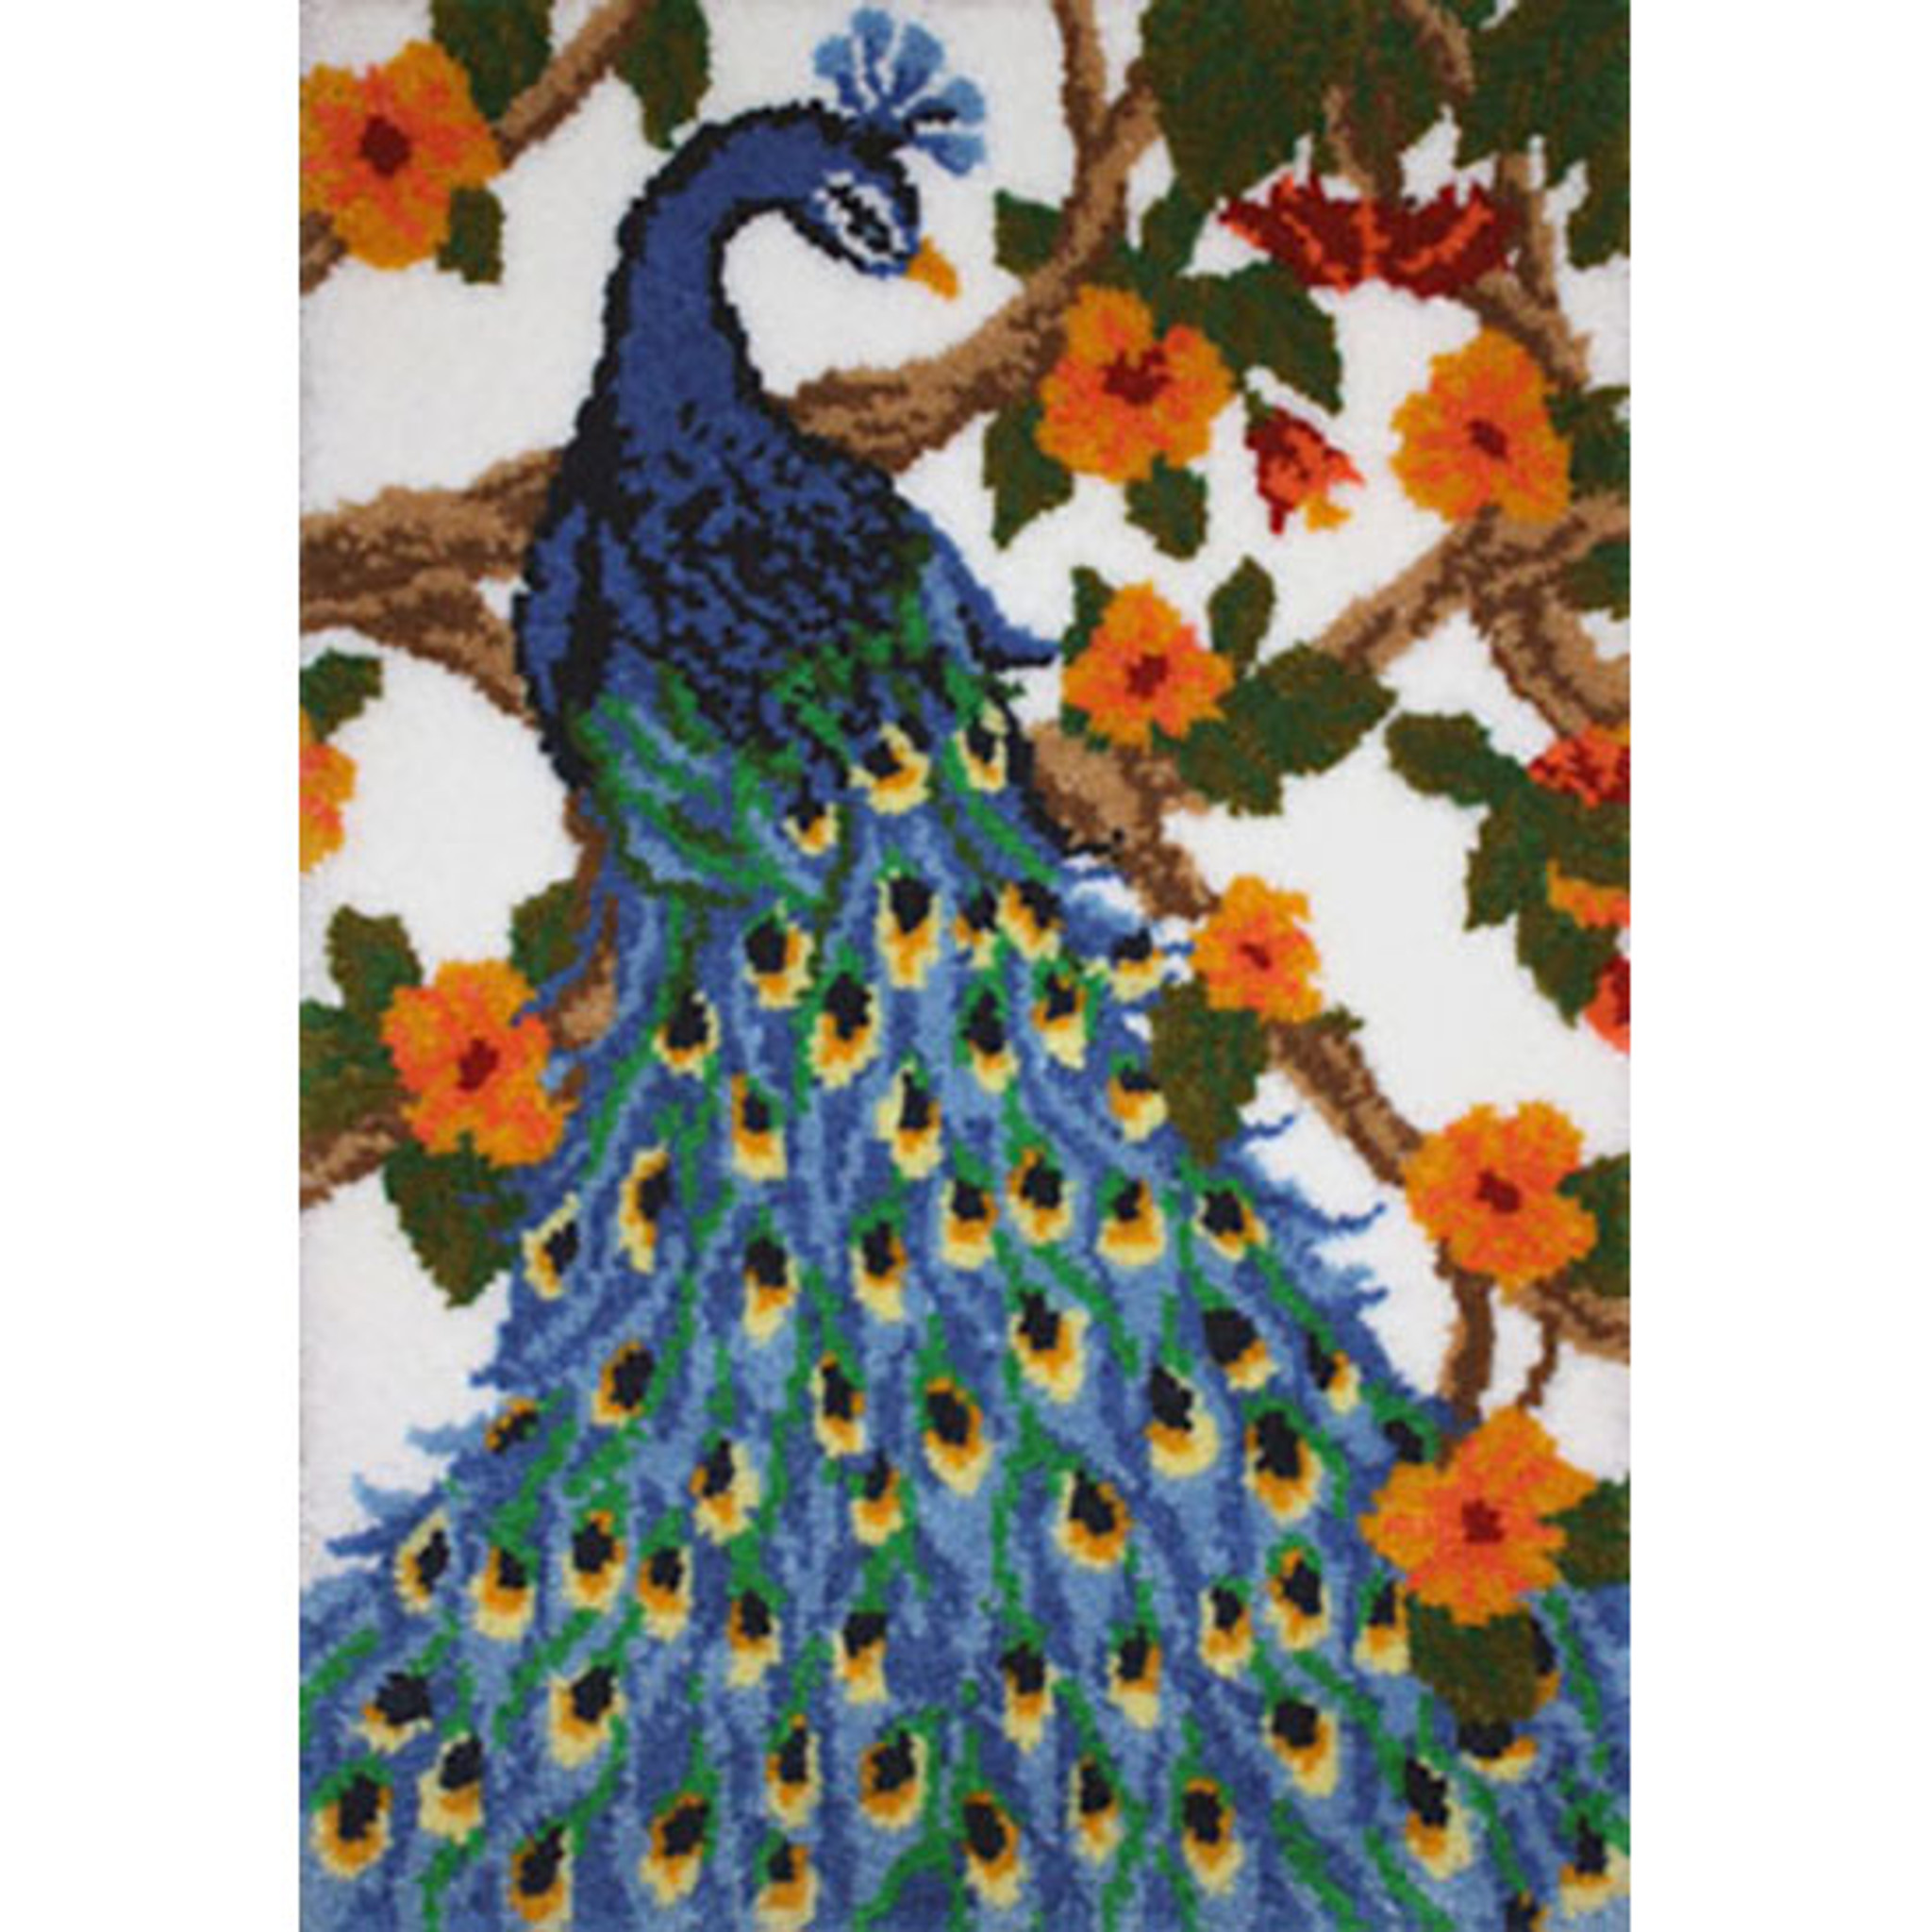 Latch hook rug kits Crafts for adults Cross stitch kit do it yourself  Embroidery Tapestry with Pre-Printed Pattern Peacock bag - AliExpress